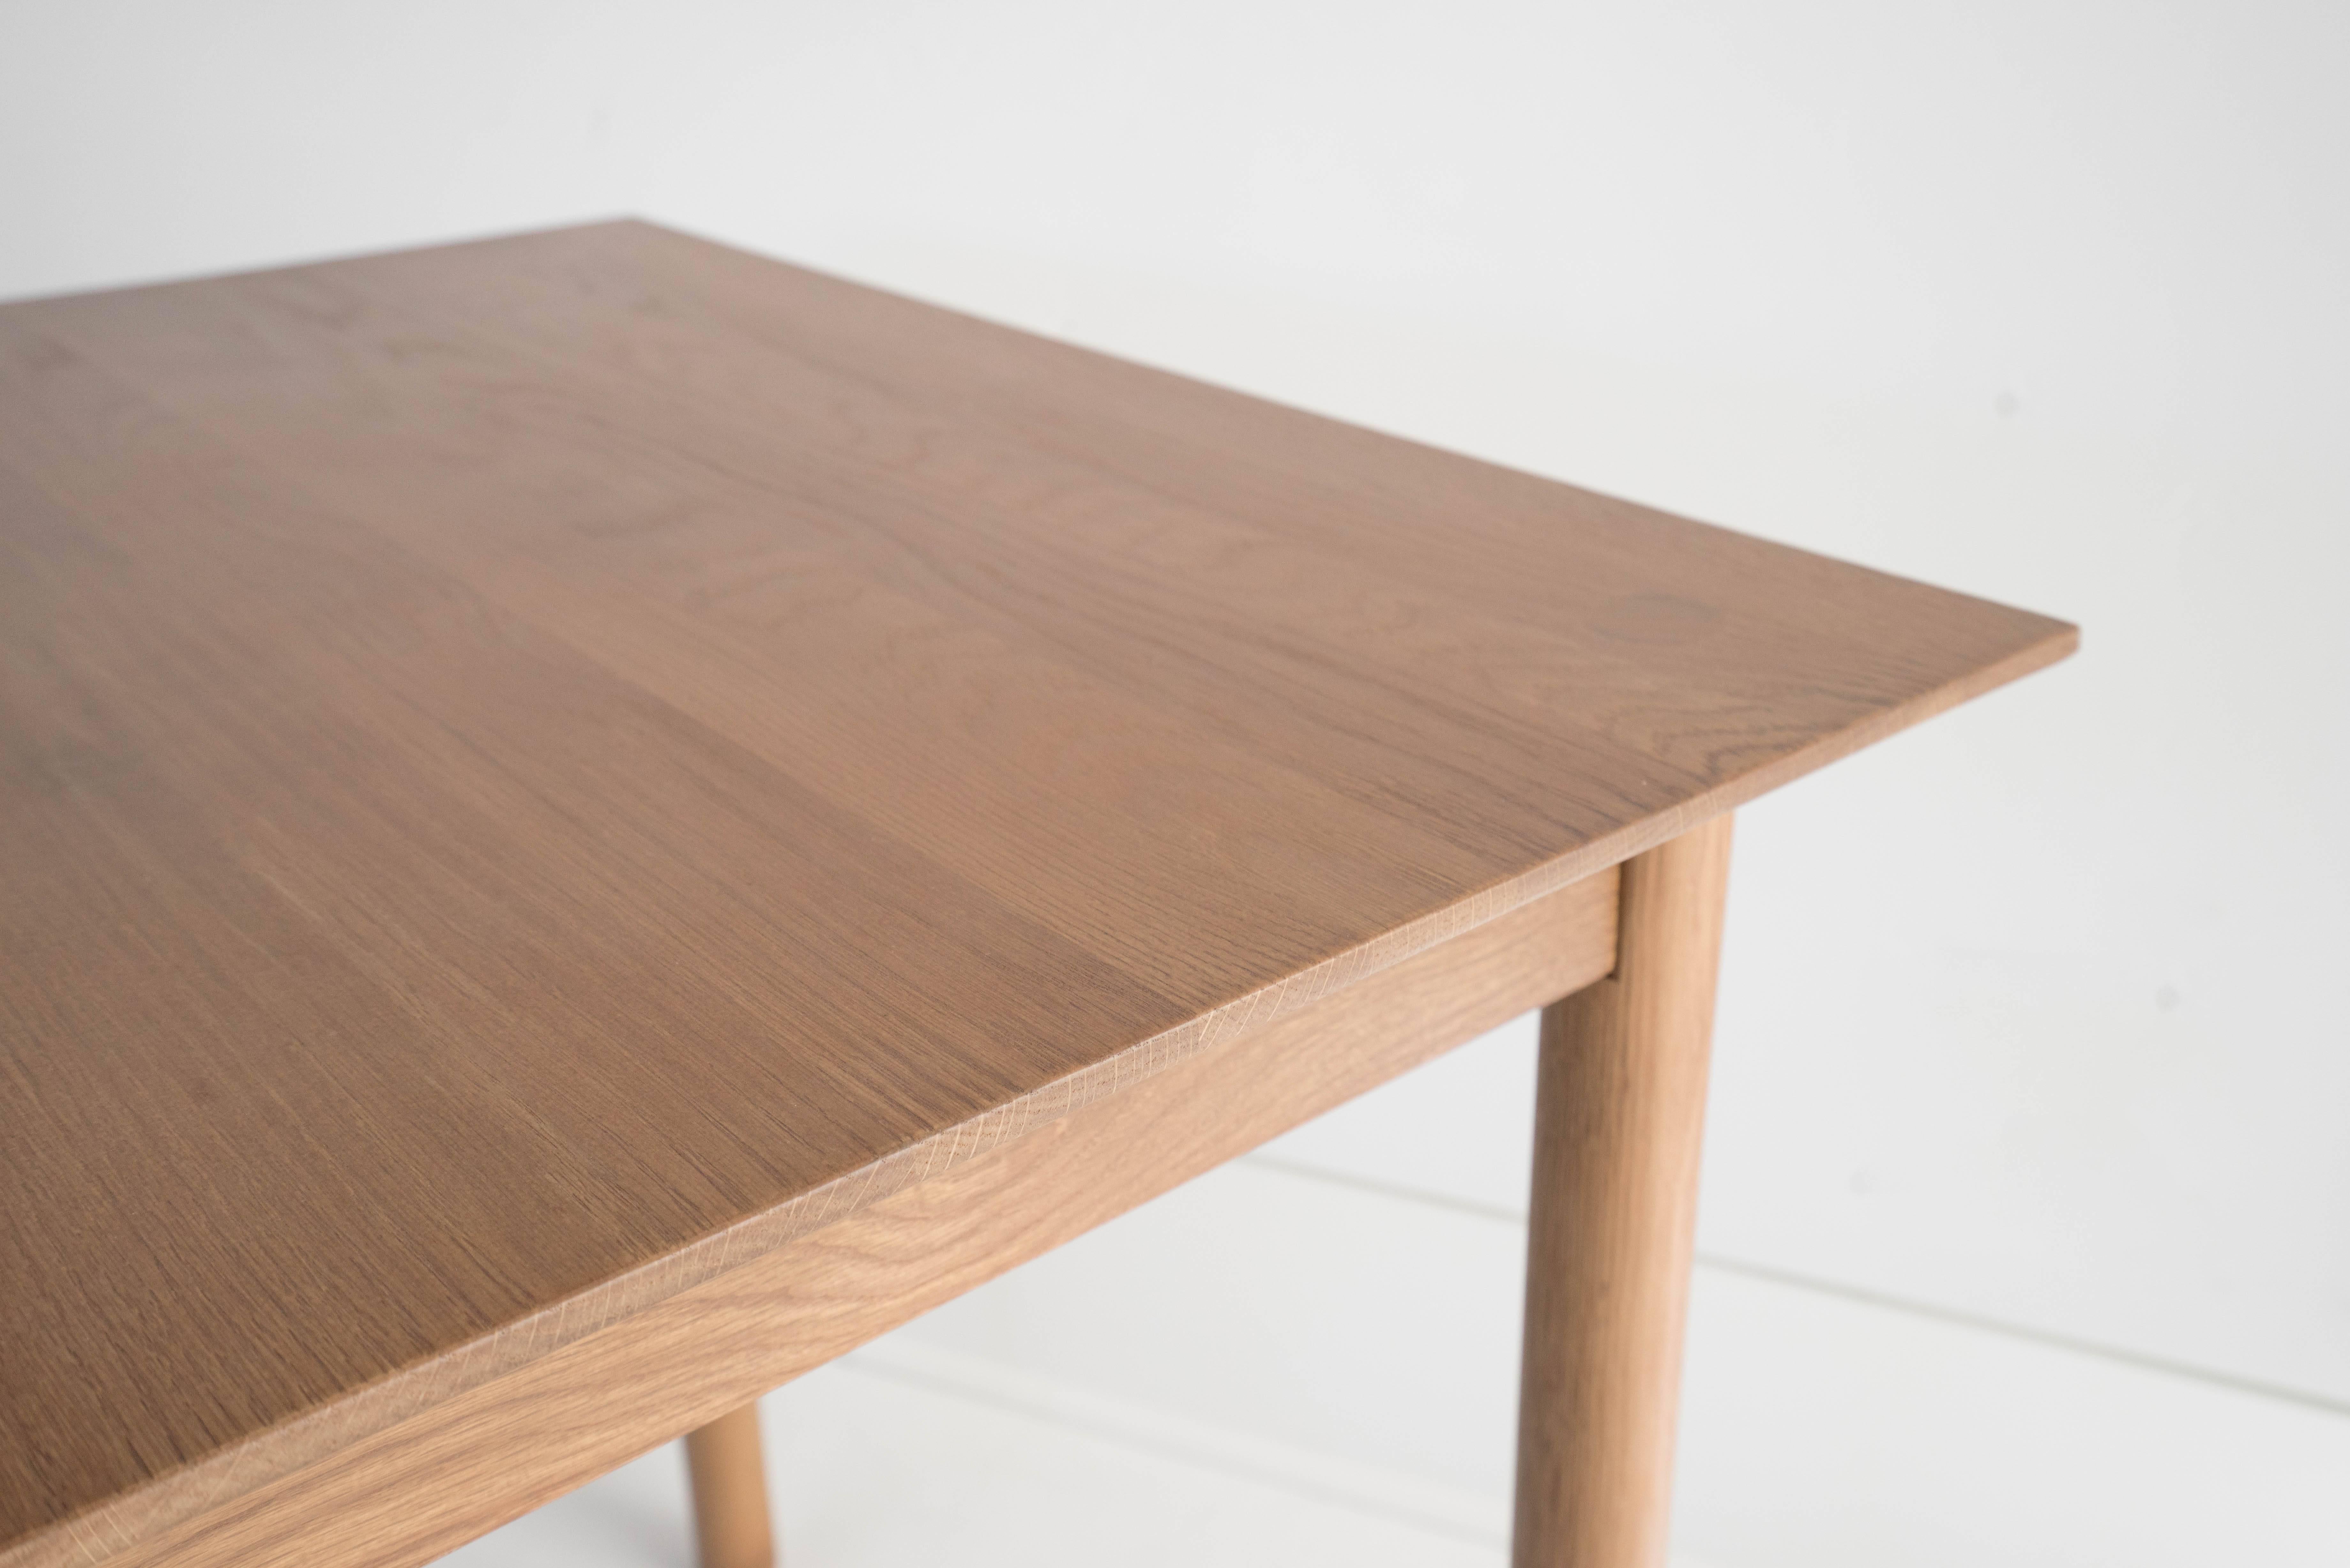 Sun at Six is a contemporary furniture design studio that works with traditional Chinese joinery masters to handcraft our pieces using traditional joinery. The coast table can be used as a desk or dining table. Fits perfectly in small space or urban